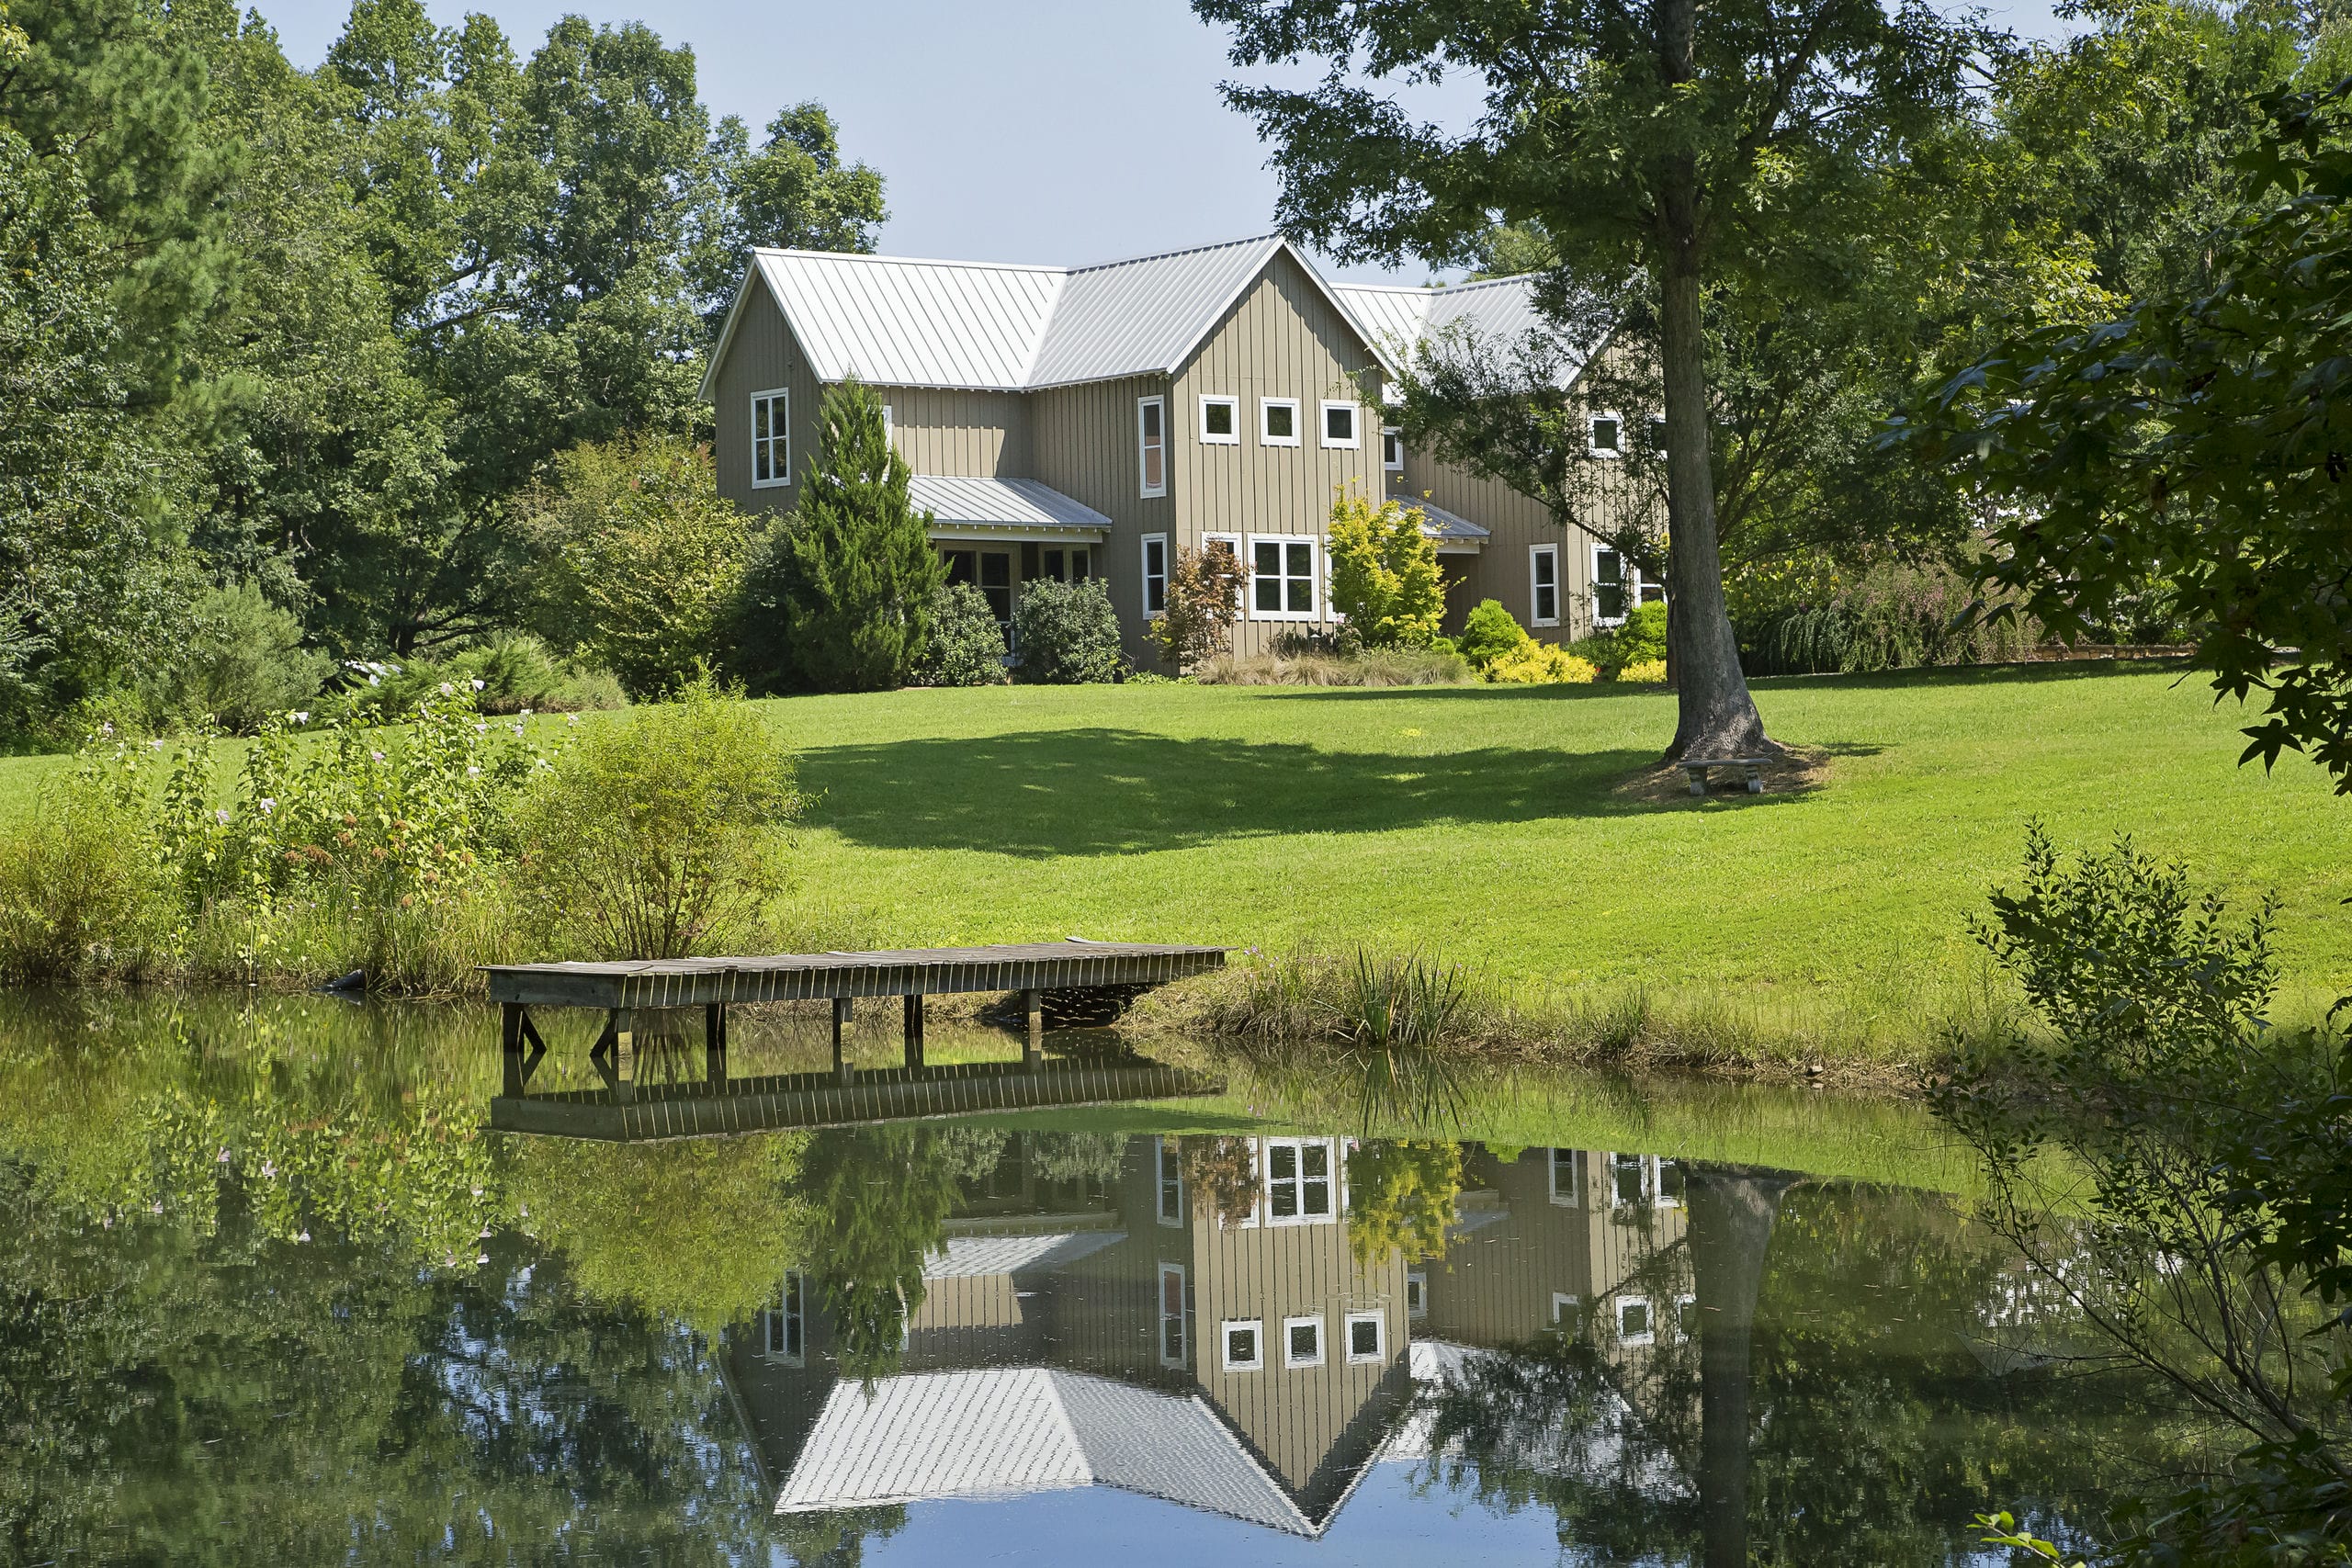 House with batten siding and gabled metal roof reflecting off a pond with wooden pier